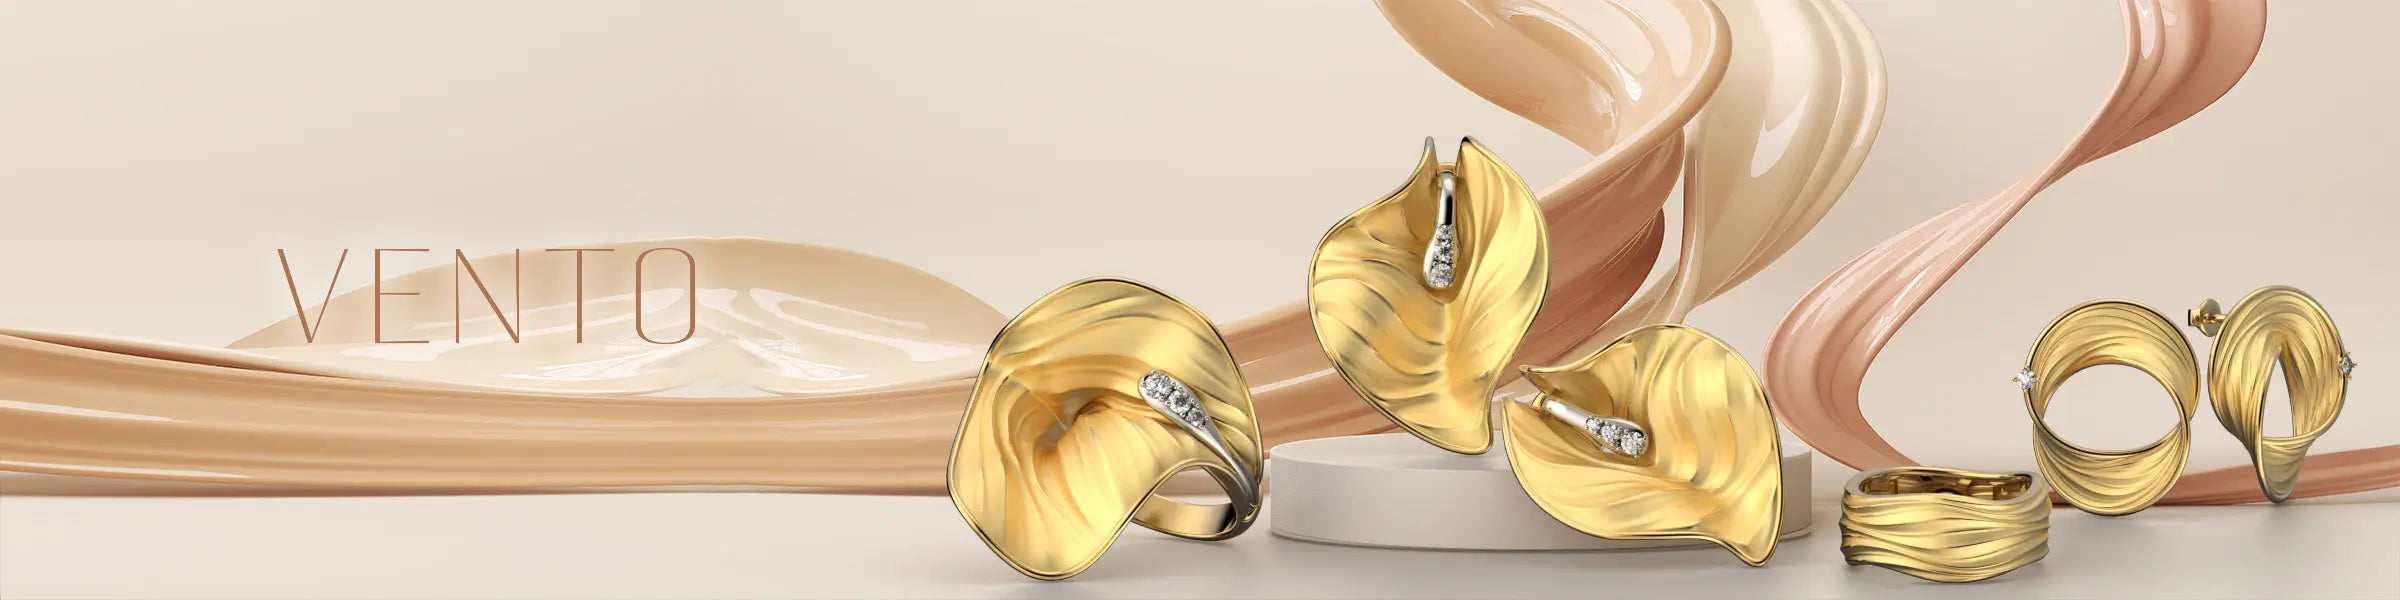 Vento is an Italian gold jewelry collection handmade in Italy in 14k or 18k real gold,modern and elegant nature inspired shapes